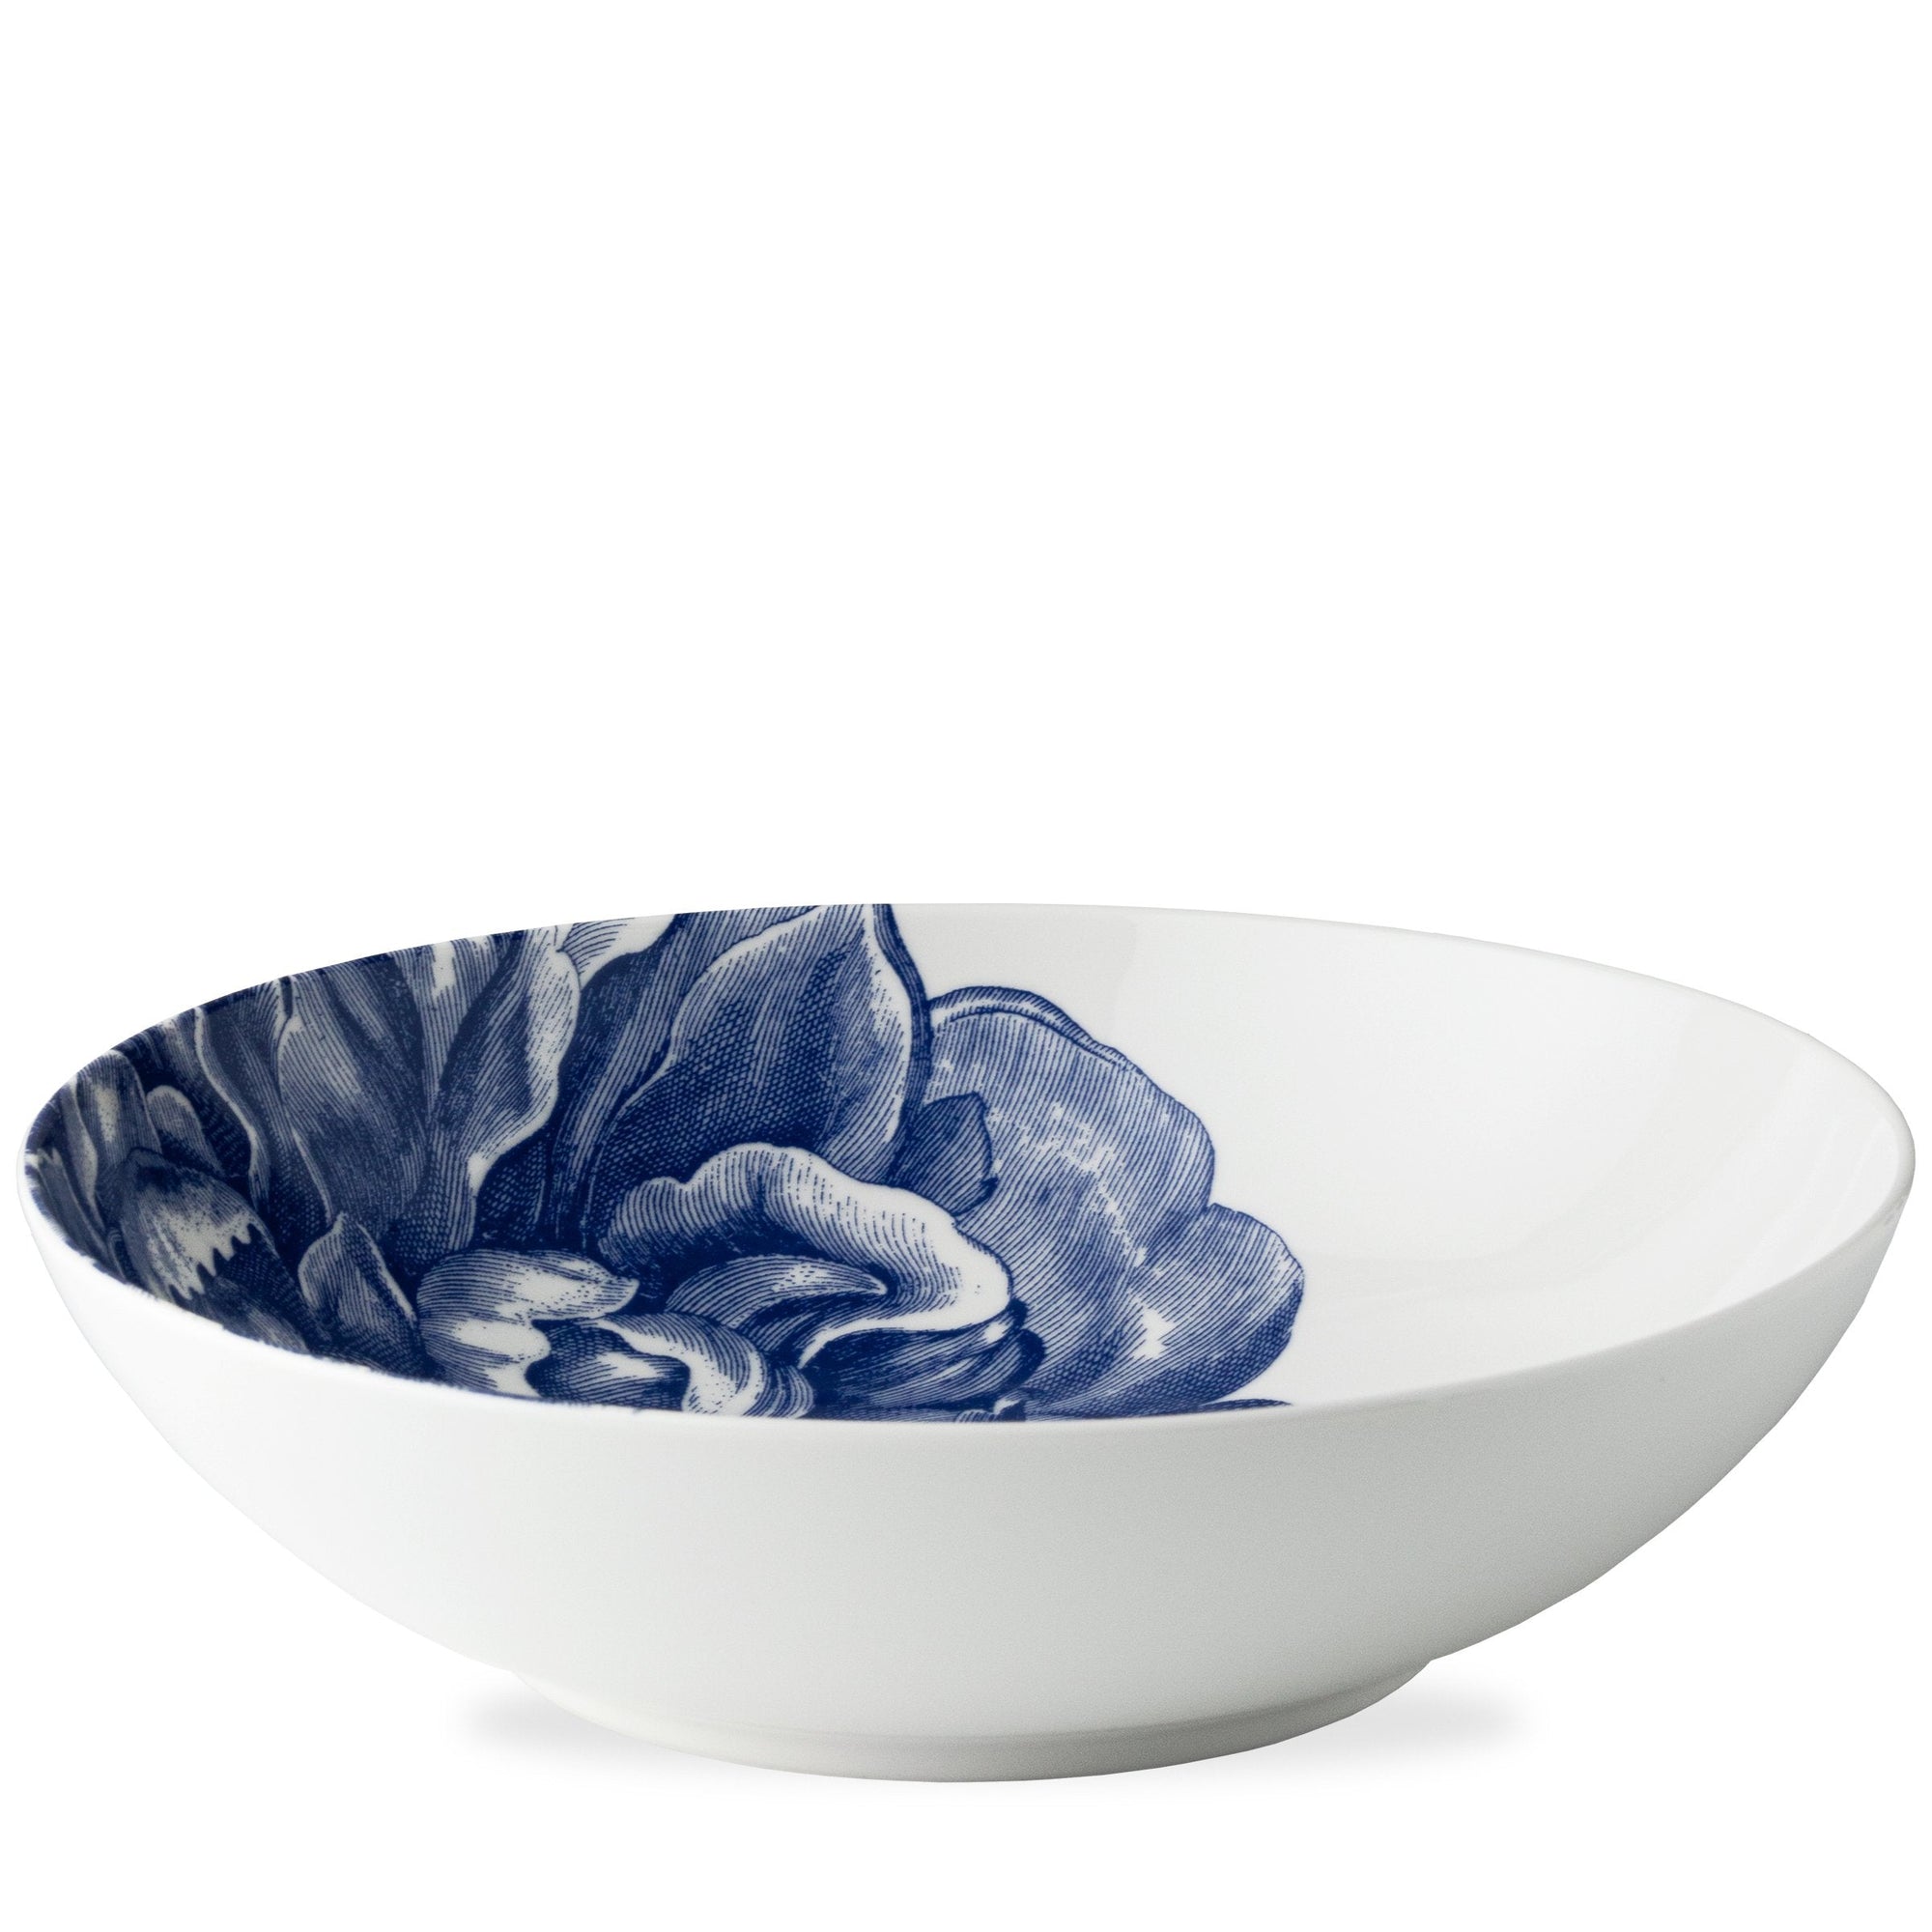 A Caskata Artisanal Home Peony Wide Serving Bowl with a detailed blue floral design on a white background, viewed from above.